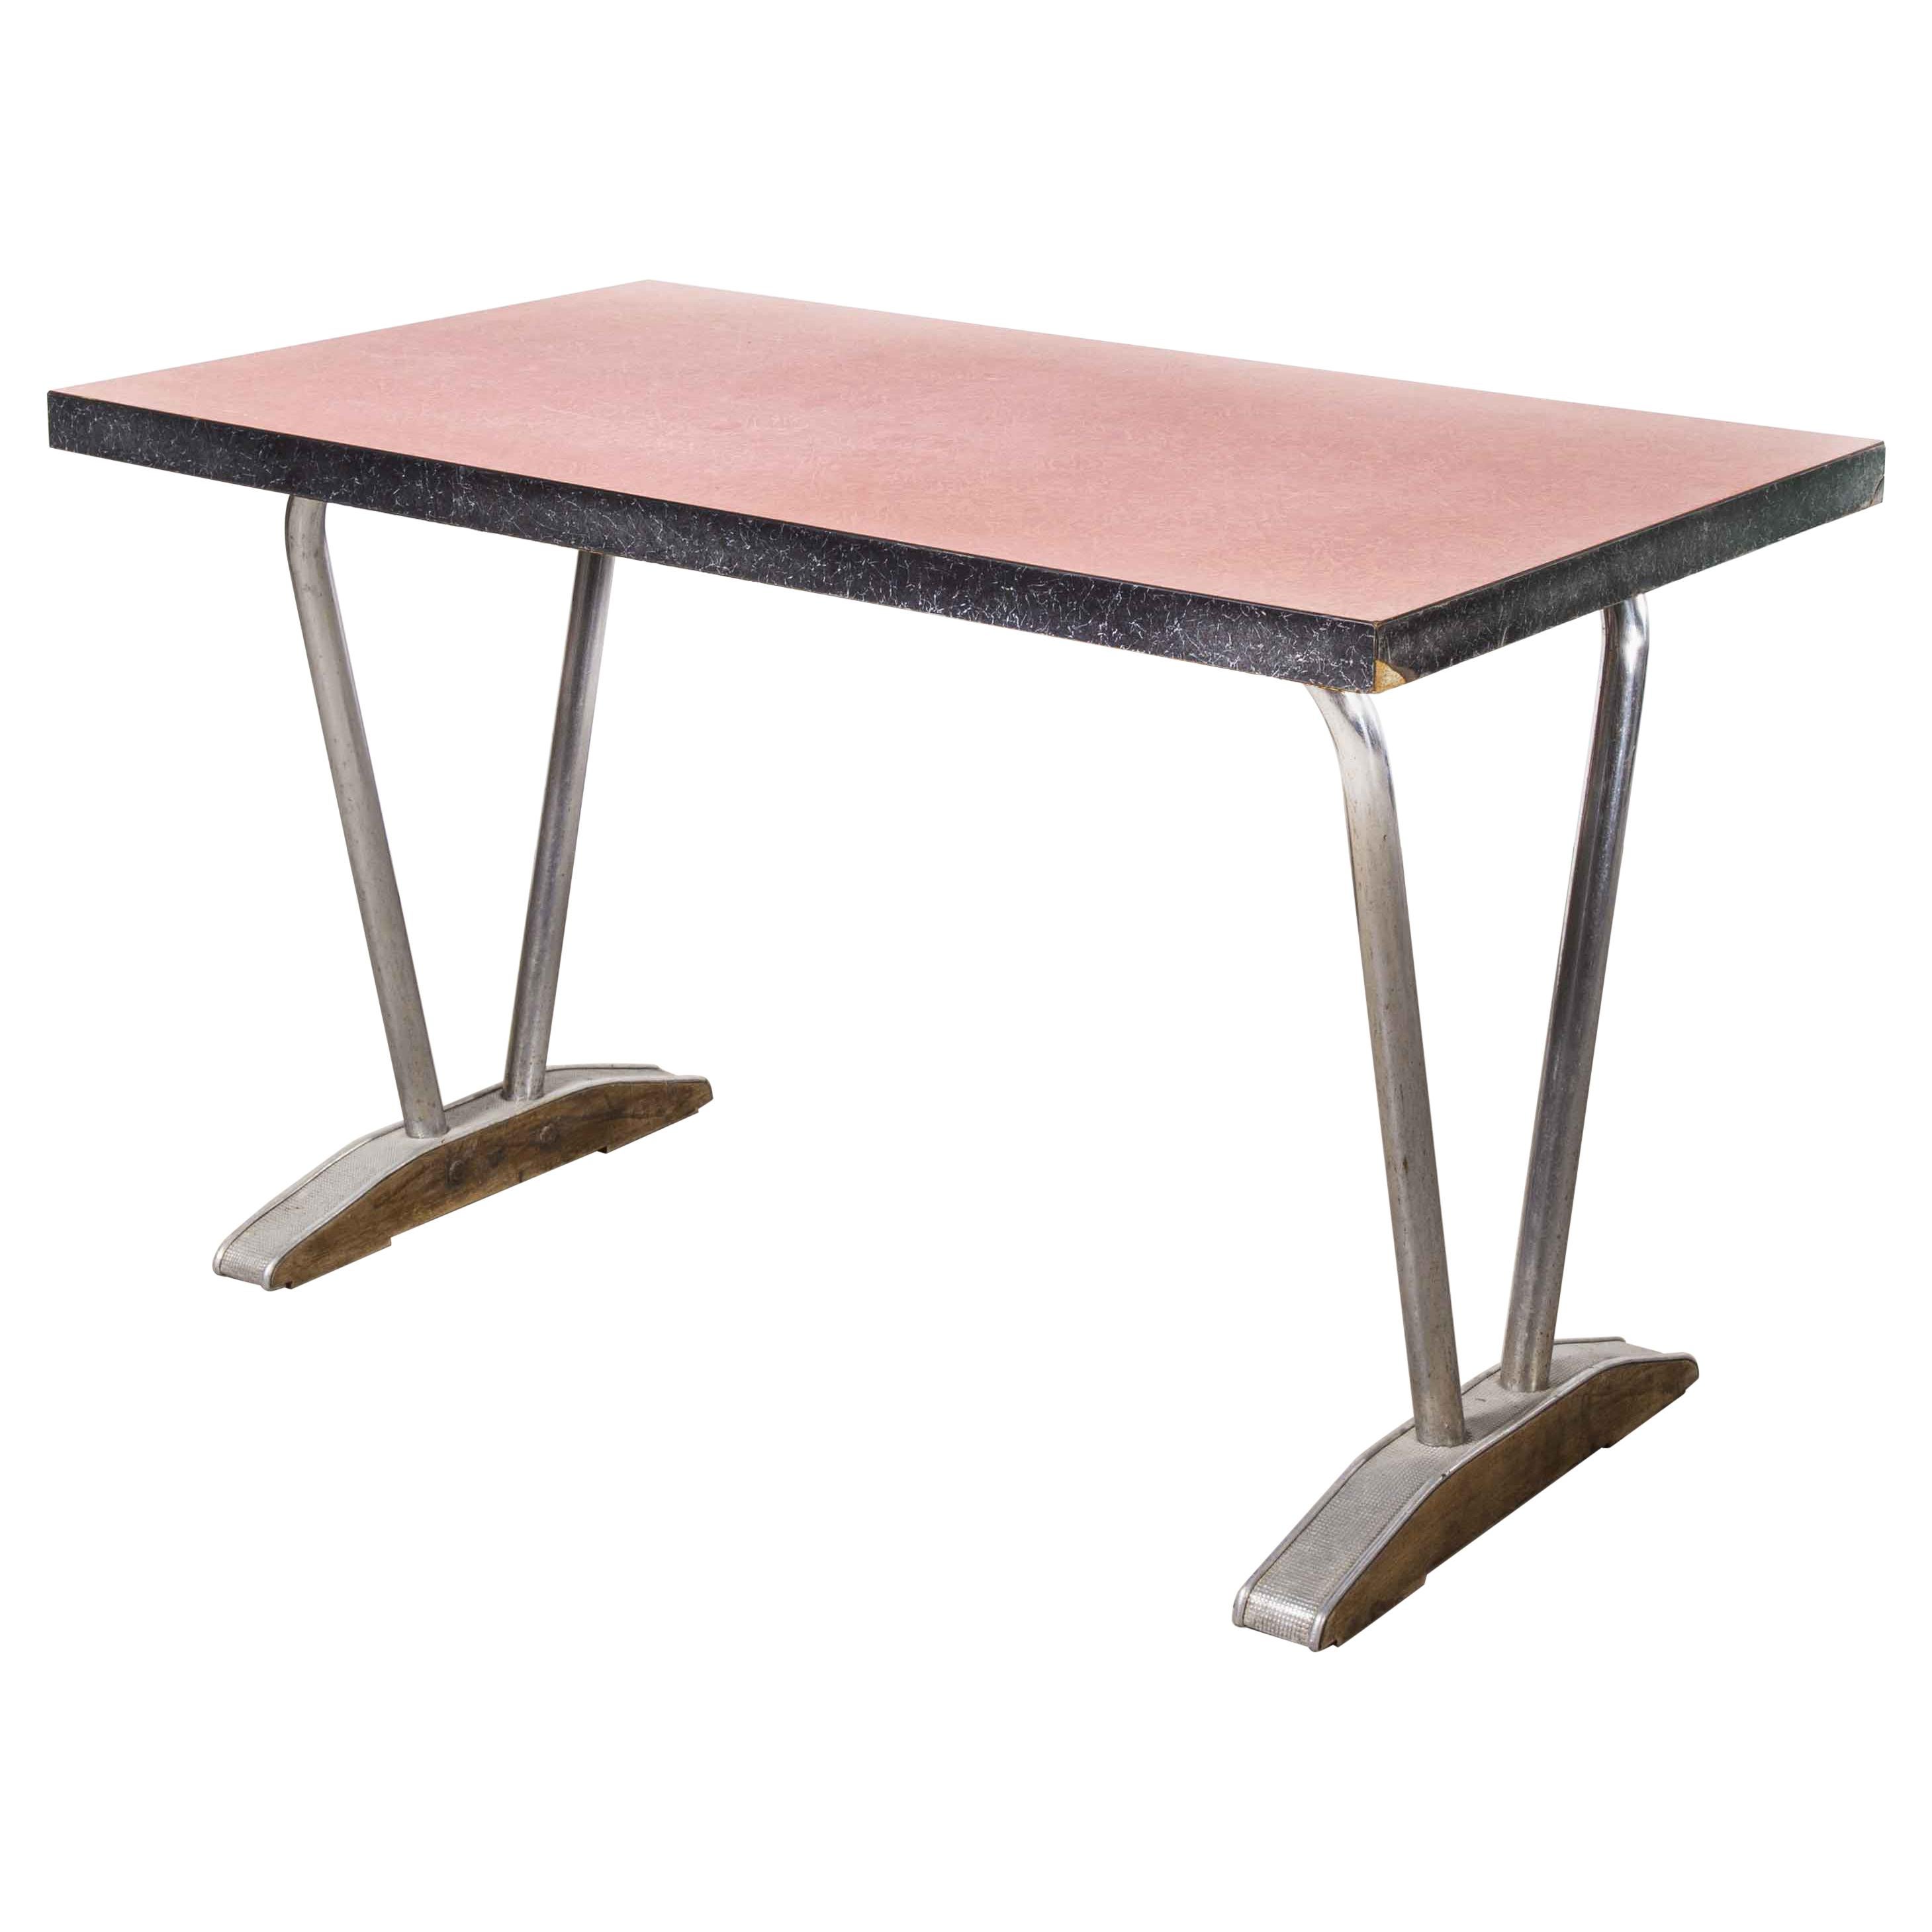 1960’s French Red Laminate Dining Table with Aluminium Base, 'Model 780.2'